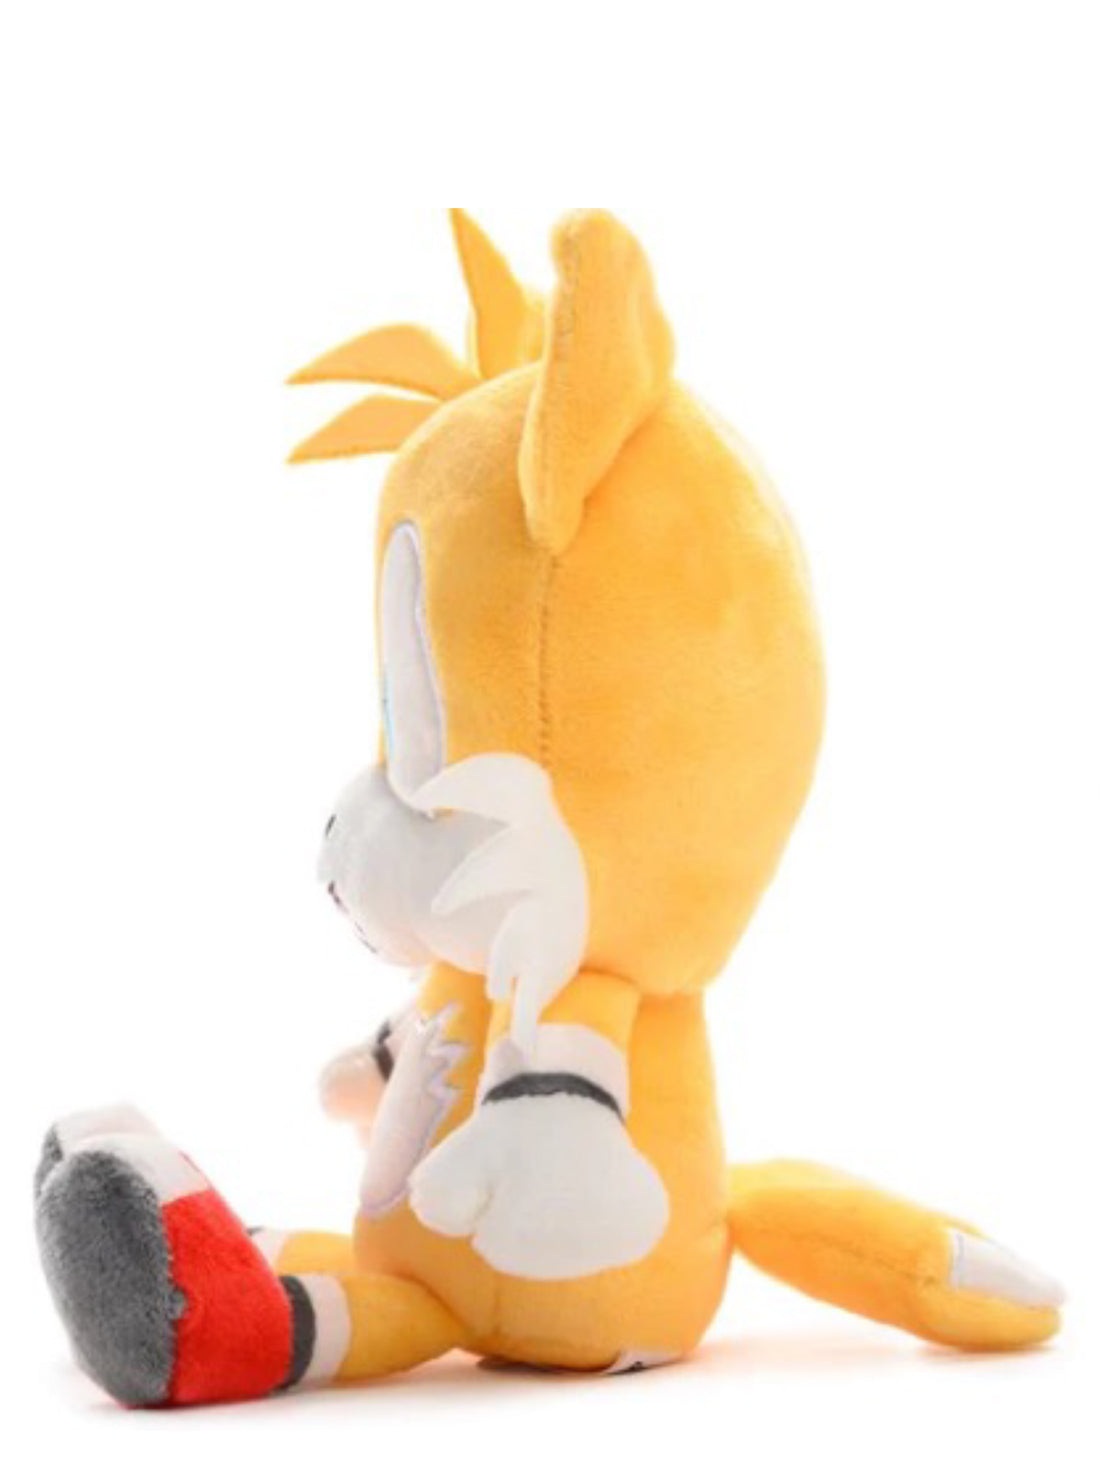 BUY NOW - SONIC THE HEDGEHOG - TAILS PLUSH PHUNNY | NECA ONLINE 